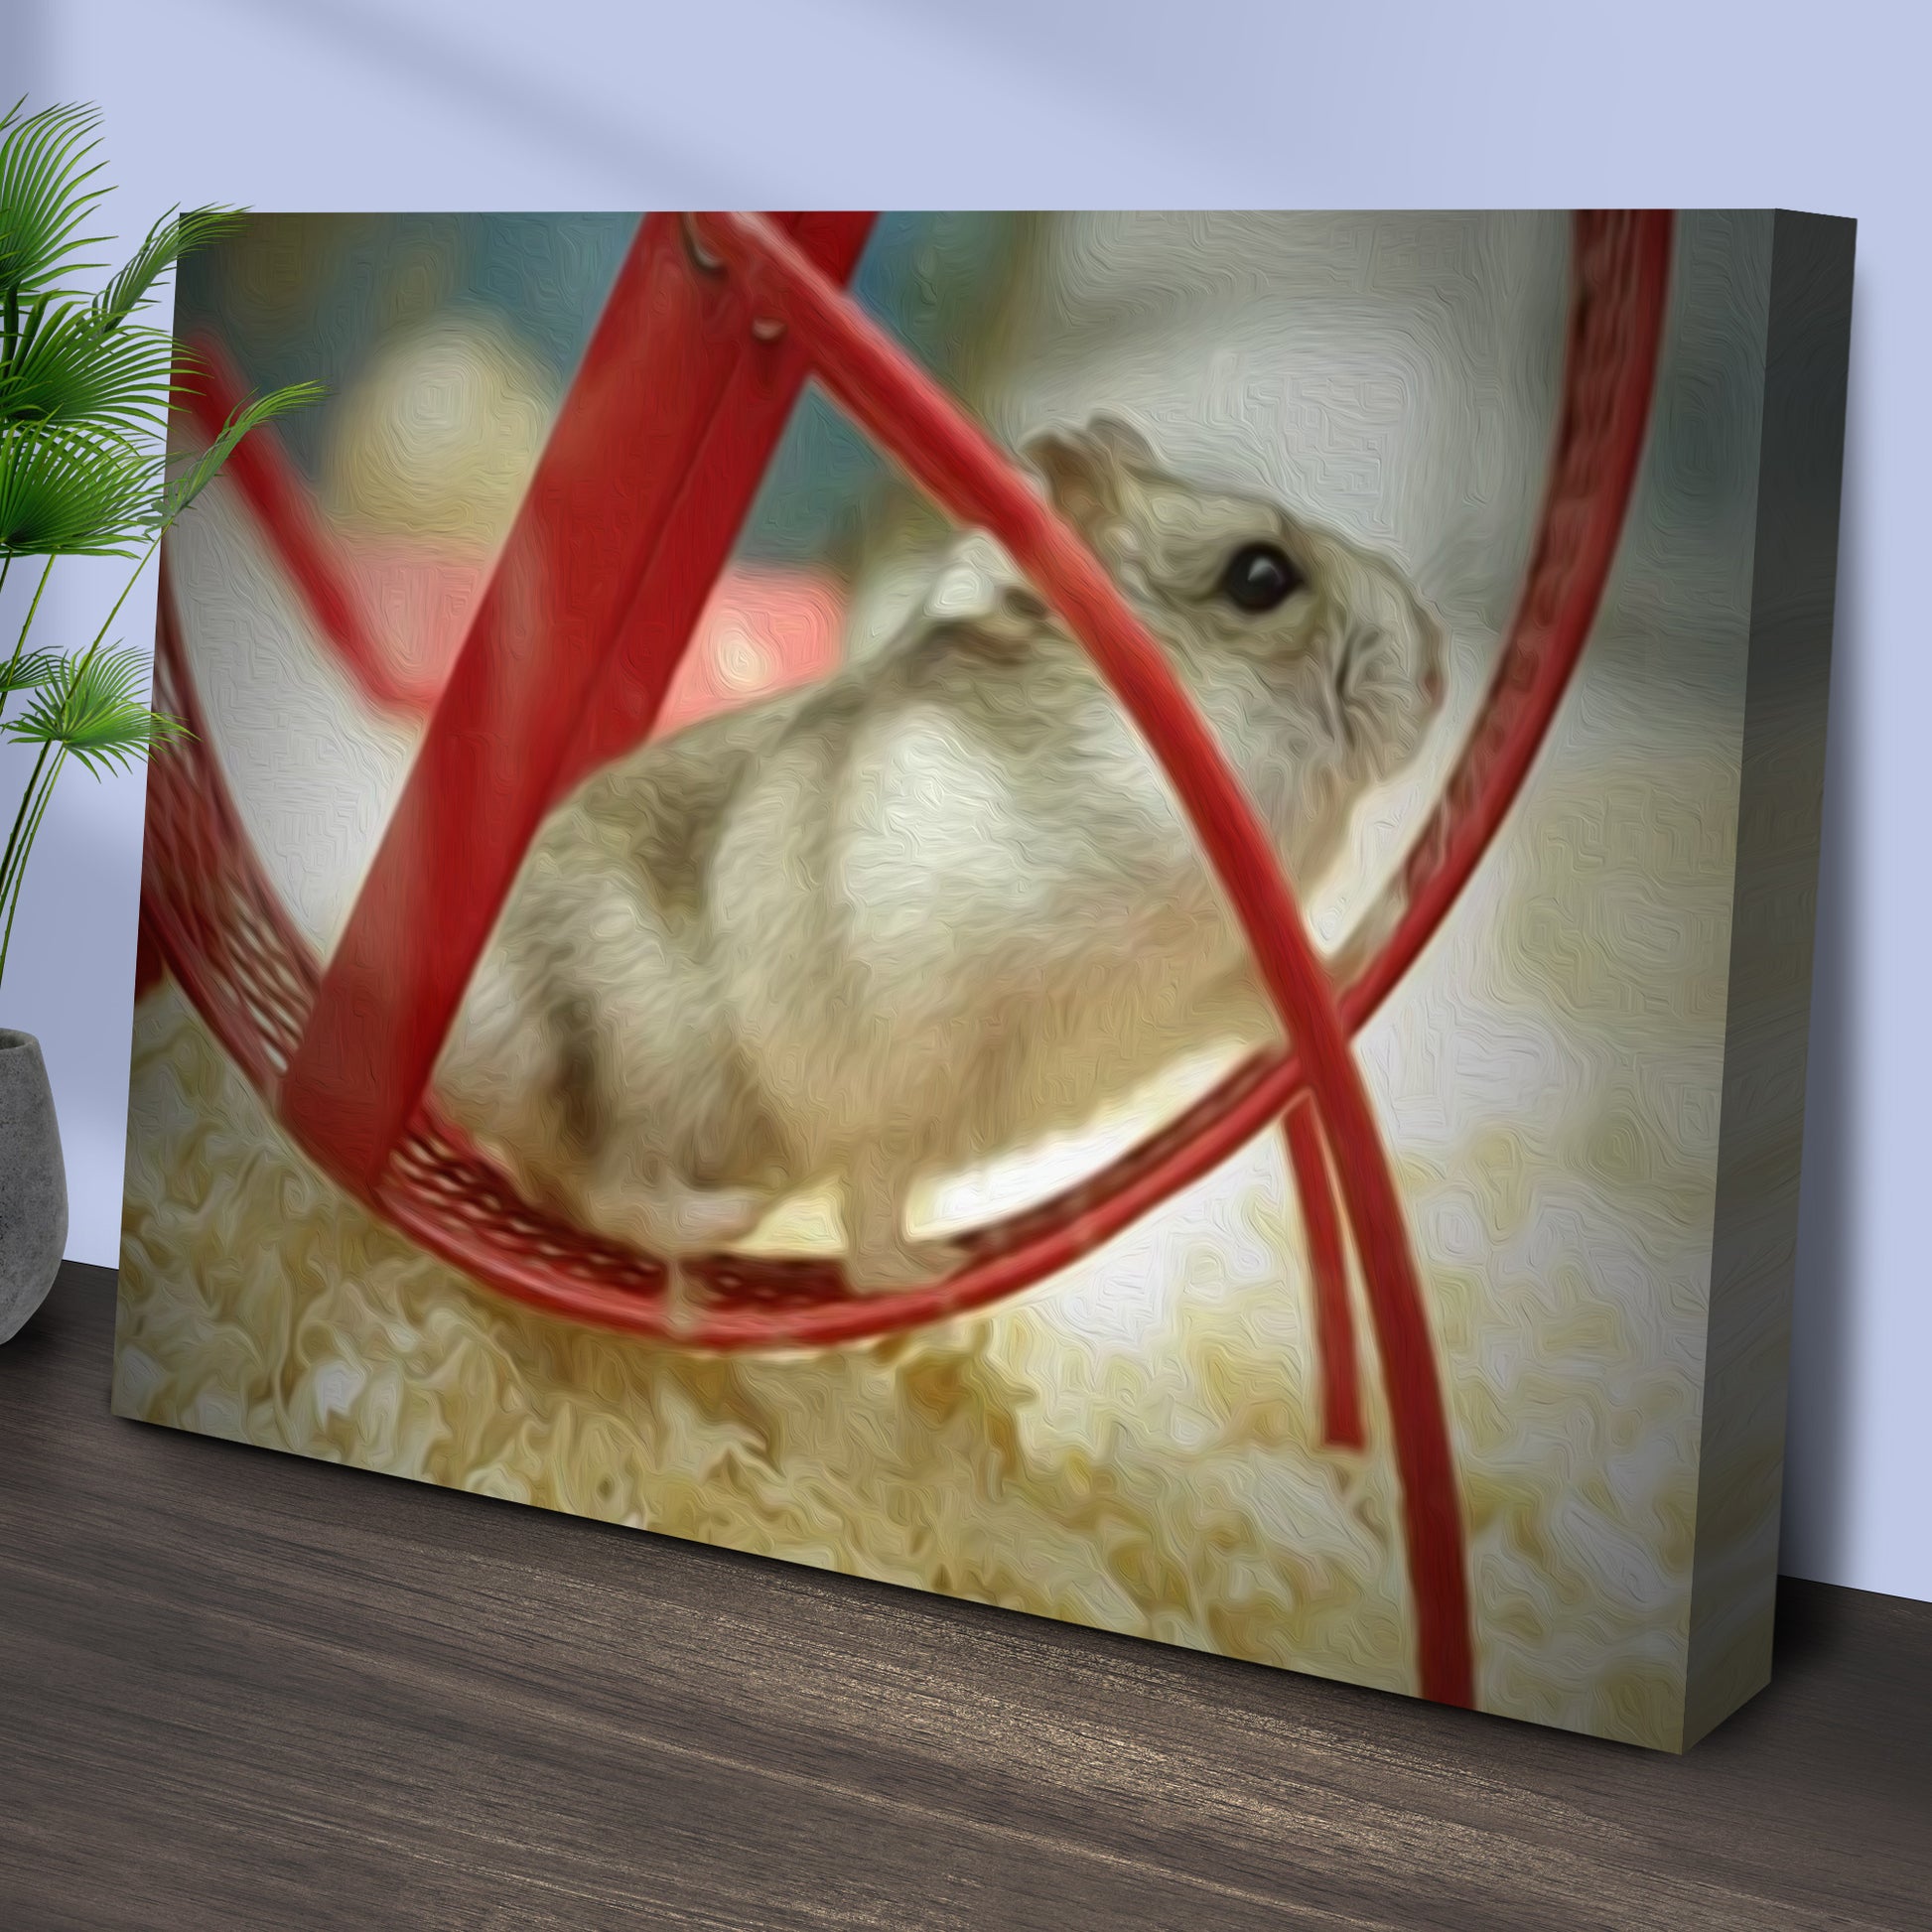 Hamster In Wheel Oil Paint Canvas Wall Art Style 1 - Image by Tailored Canvases